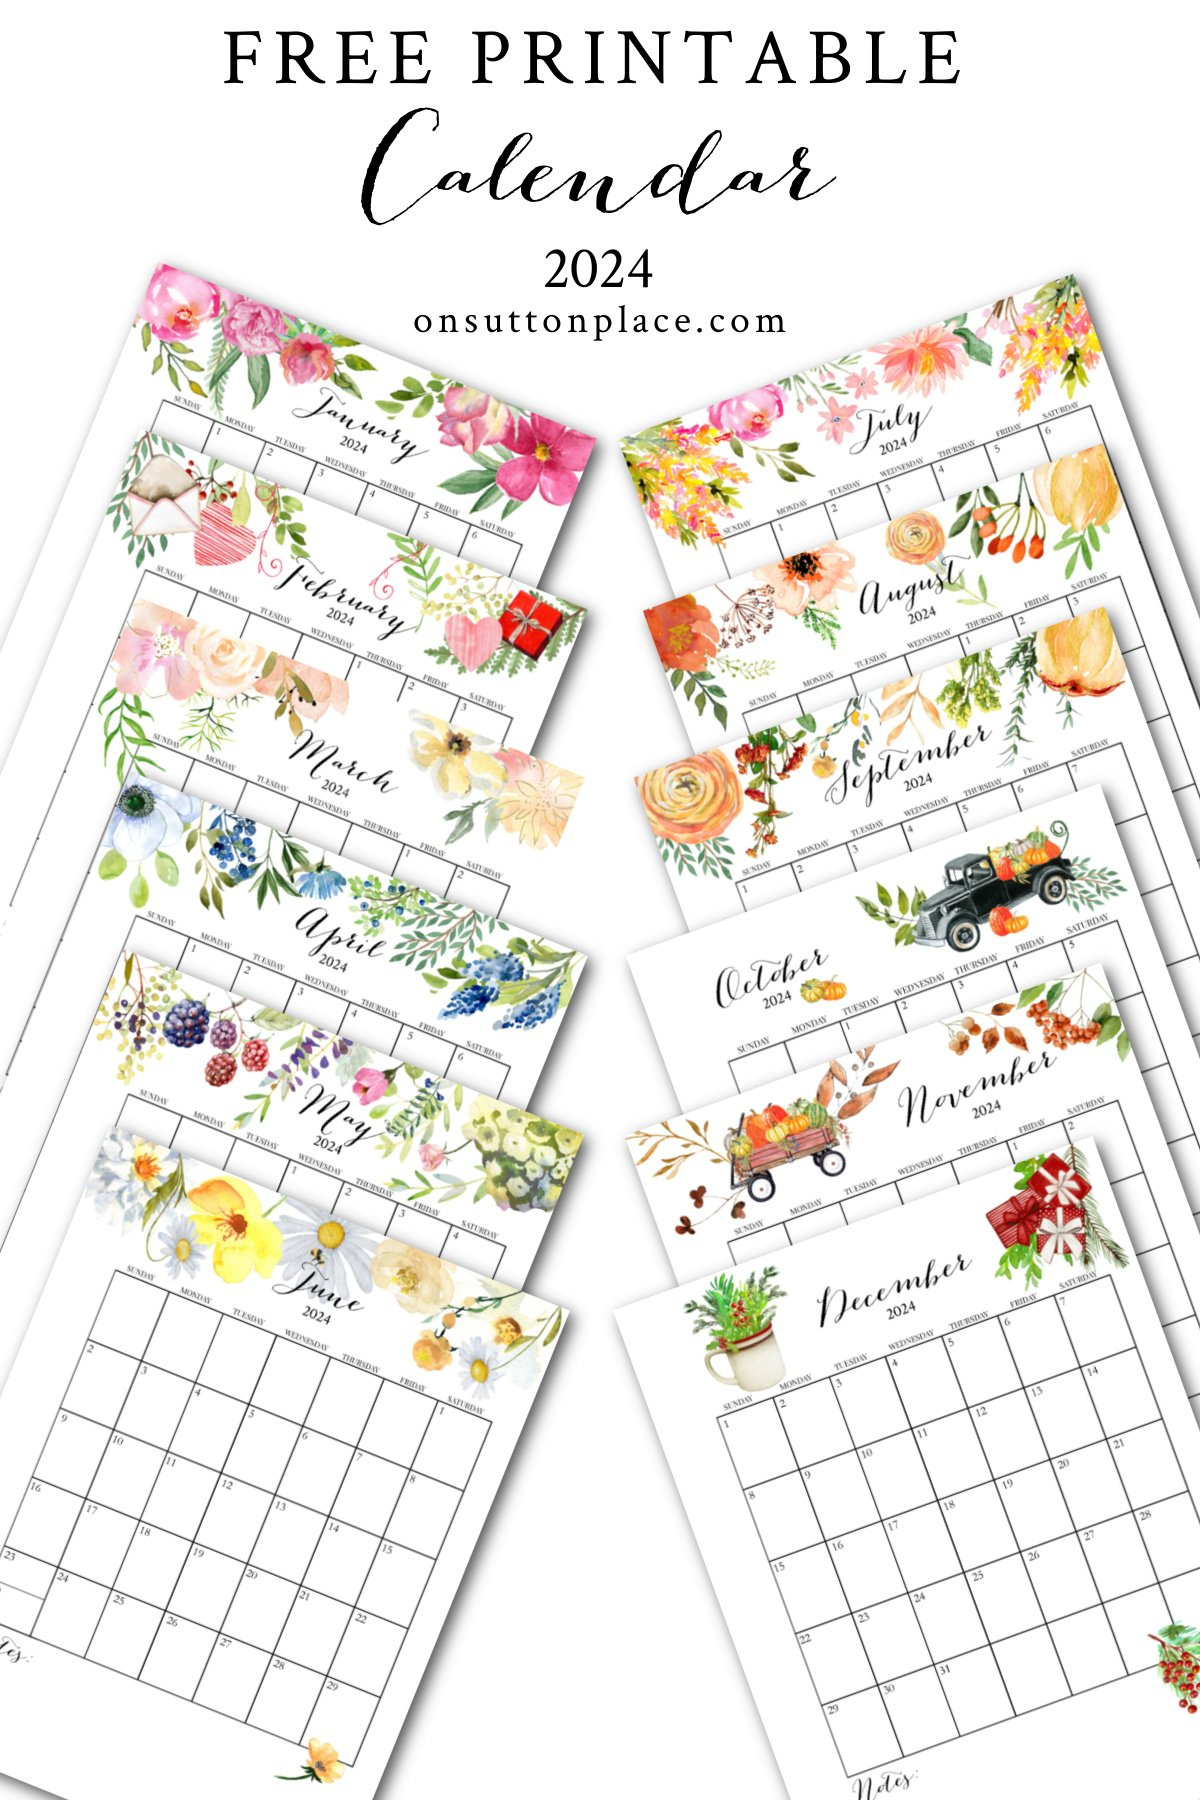 2024 Free Printable Calendar With Planner Pages - On Sutton Place | Free Printable Calendars 2024